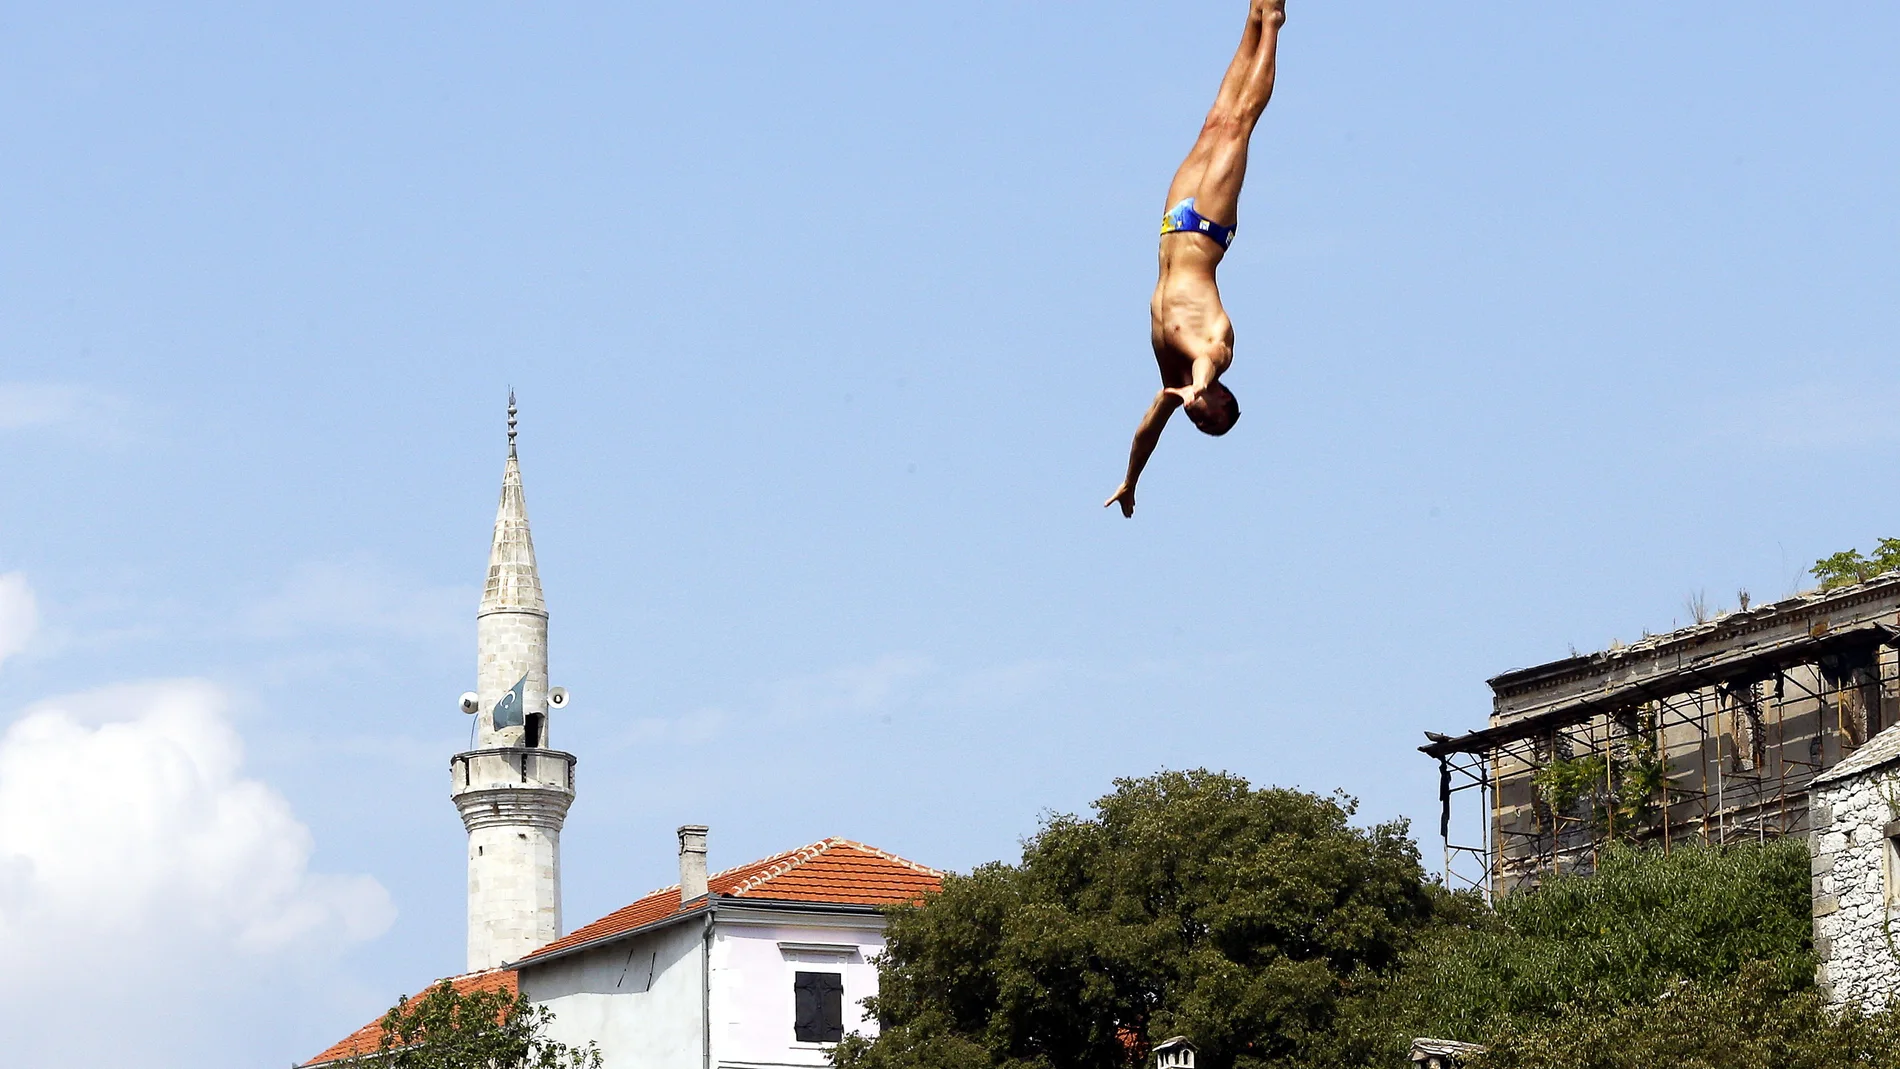 Red Bull Cliff Diving Mostar.